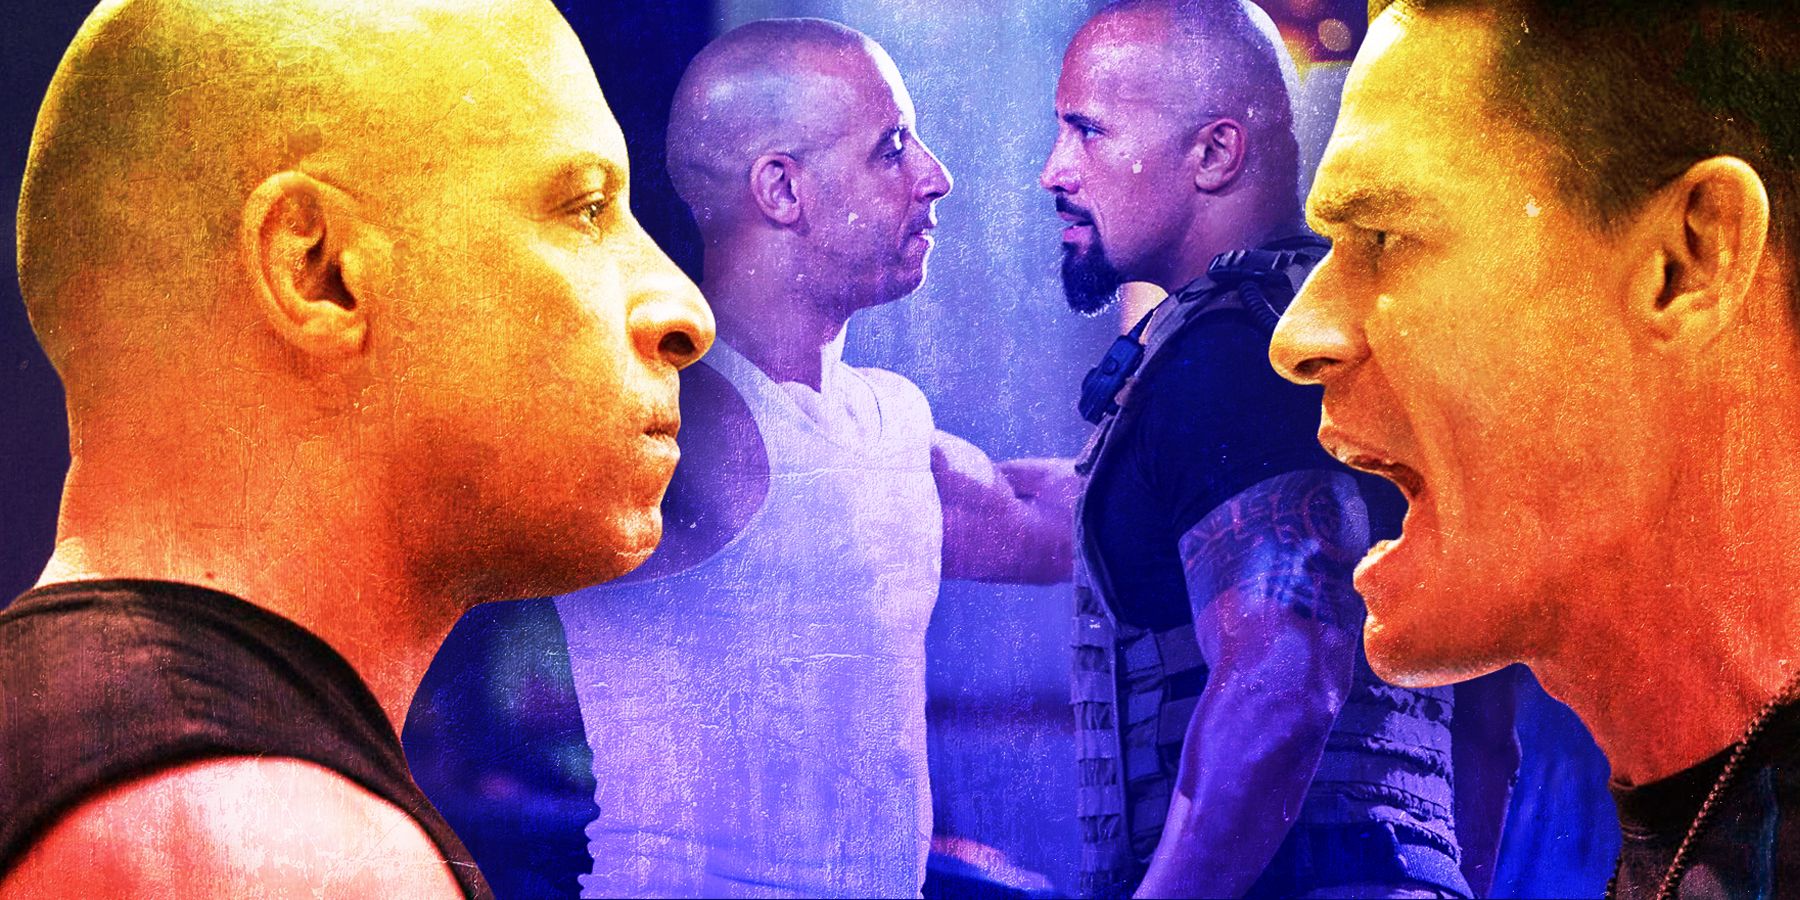 Dominic Toretto staring at his brother Jakob and Dominic staring down Lukje Hobbs from the Fast and Furious franchise 